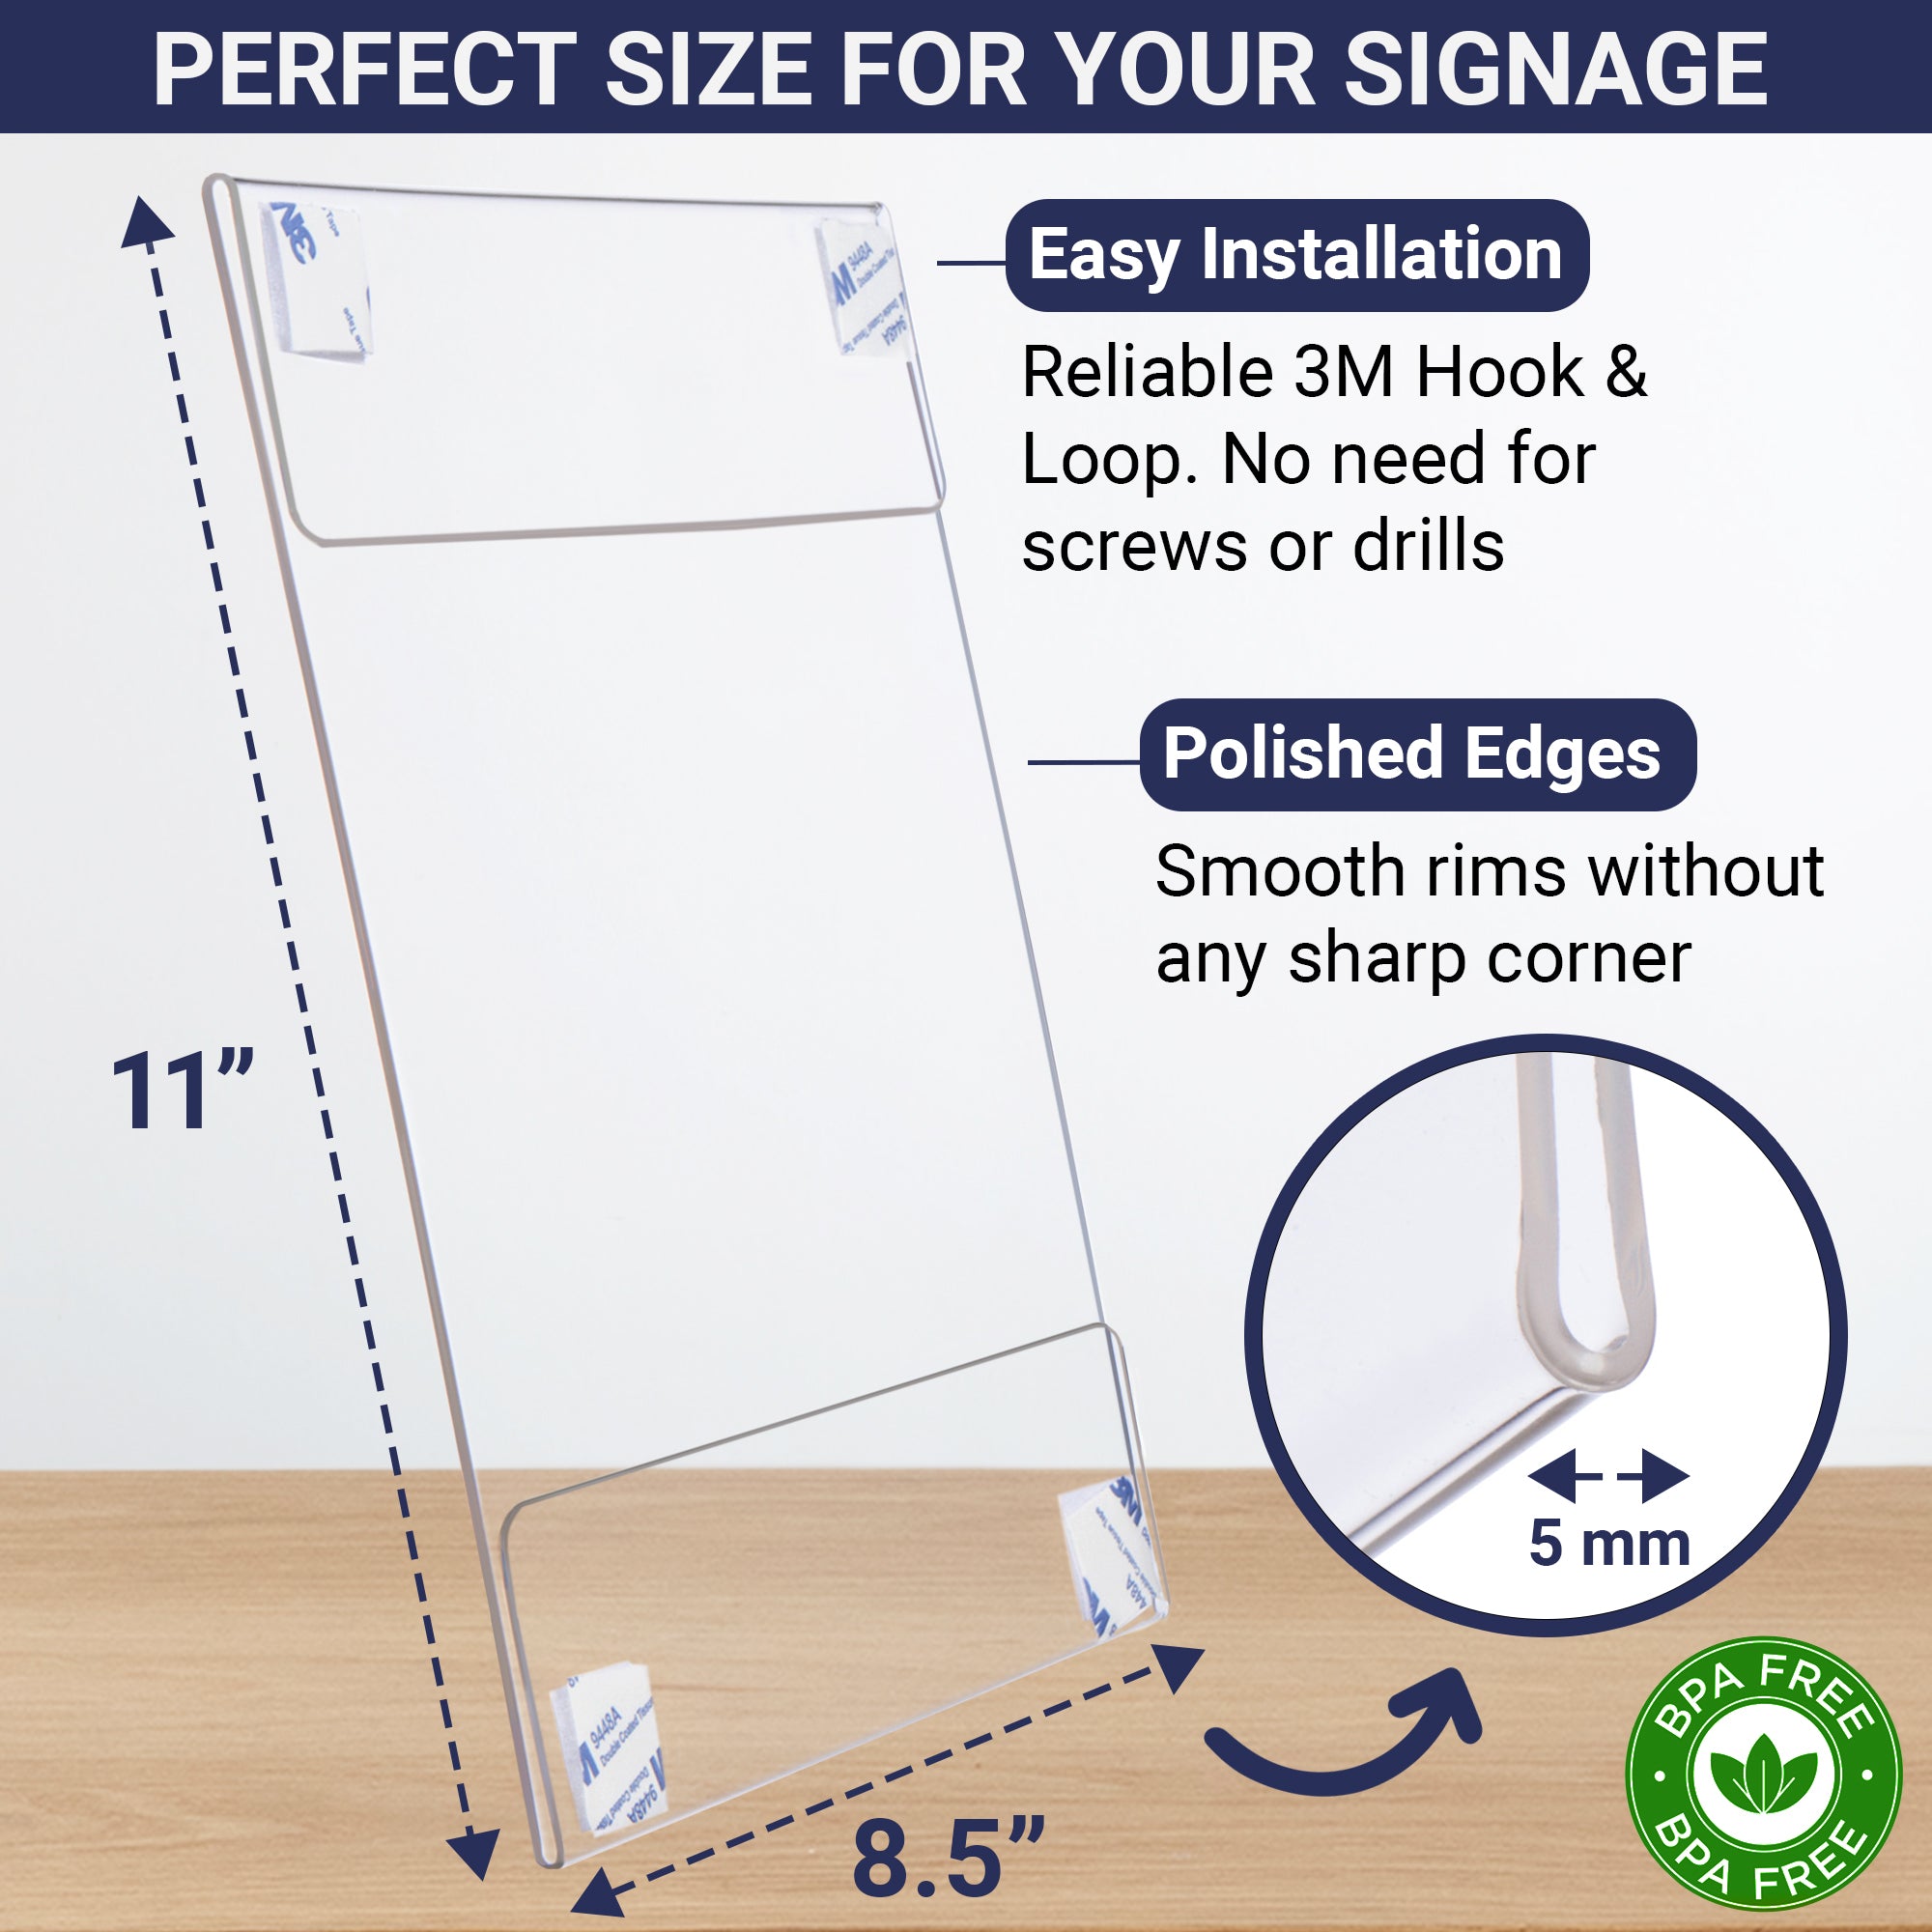 Acrylic Sign Holder with Hook and Loop Adhesive, 8.5 x 11 inches - Por